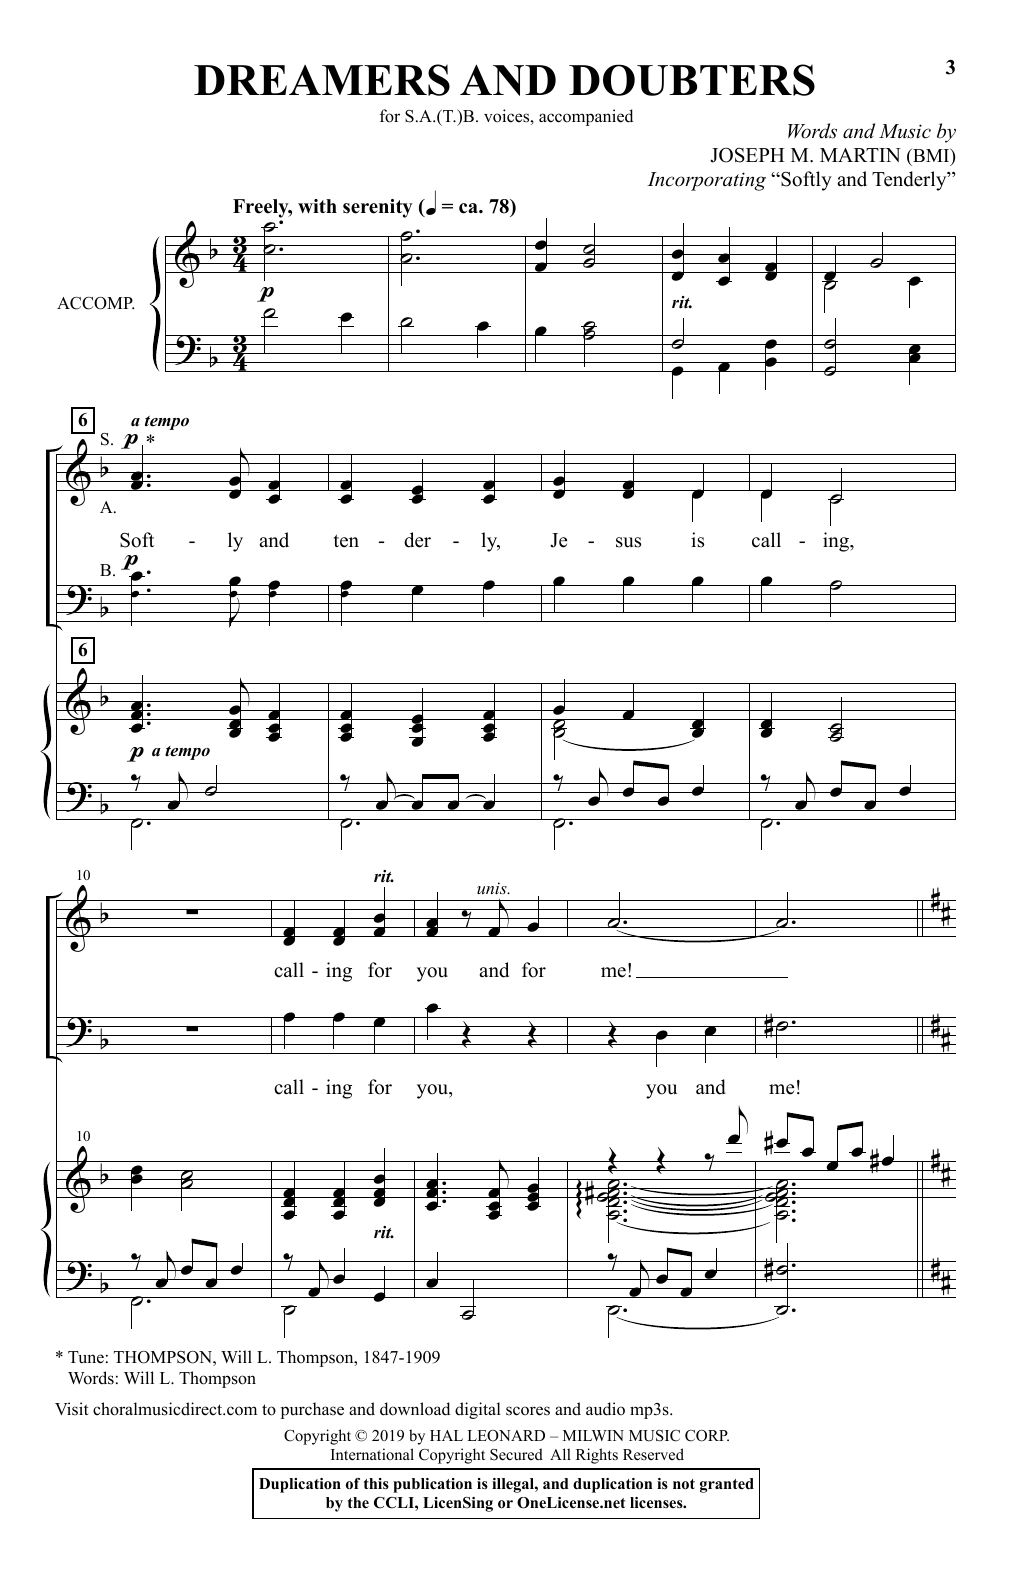 Download Joseph M. Martin Dreamers And Doubters Sheet Music